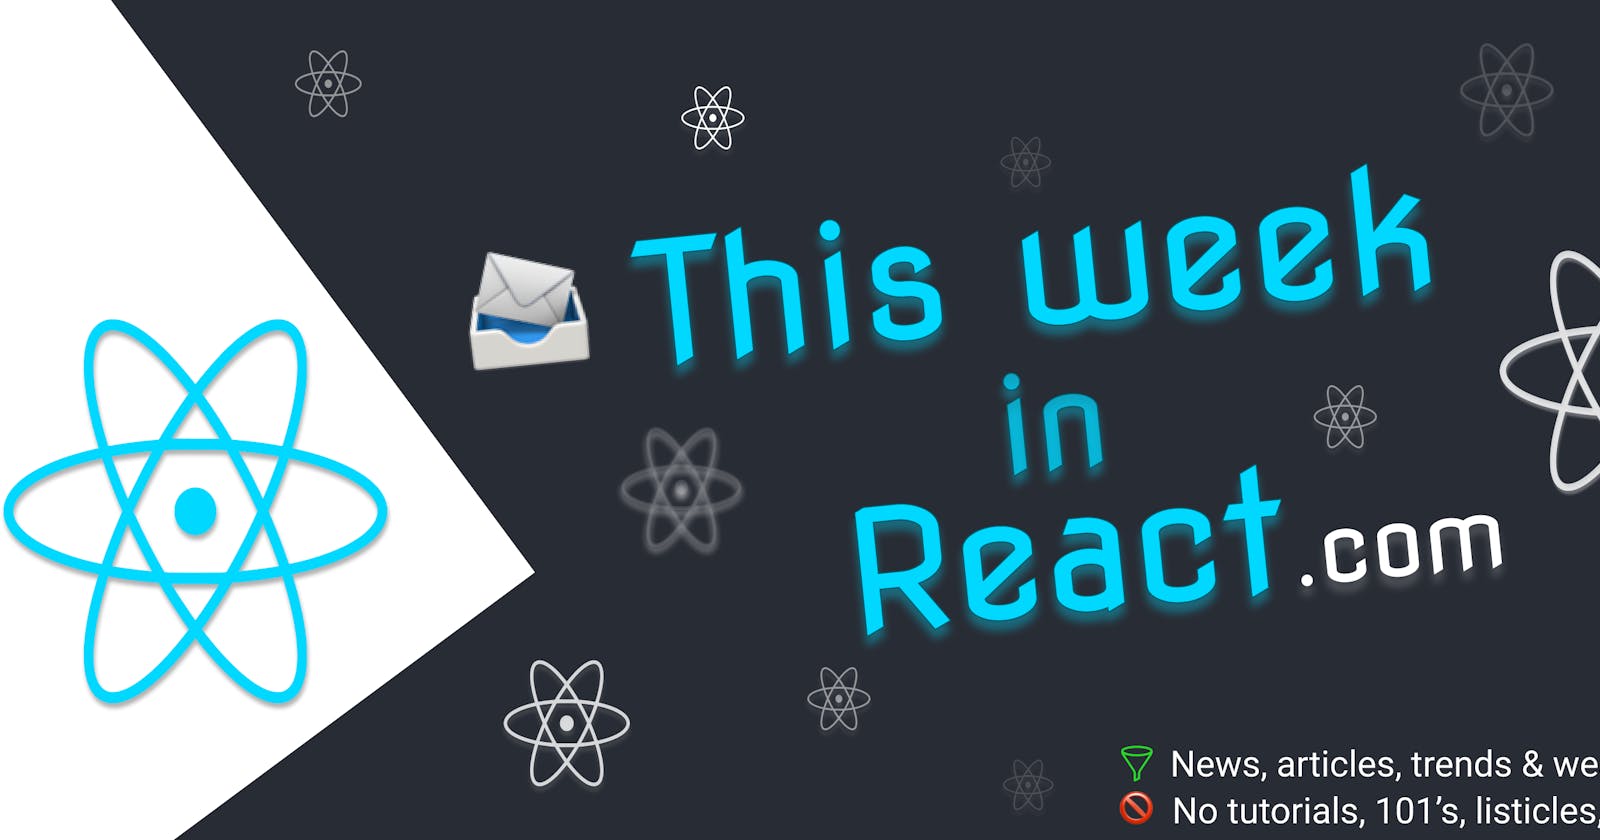 This Week In React #97: React vs Solid, Headless Components, FS-structure, Remotion, Gatsby, React-Native, Expo, Skia, Vitest, Socket, Interop 2022...